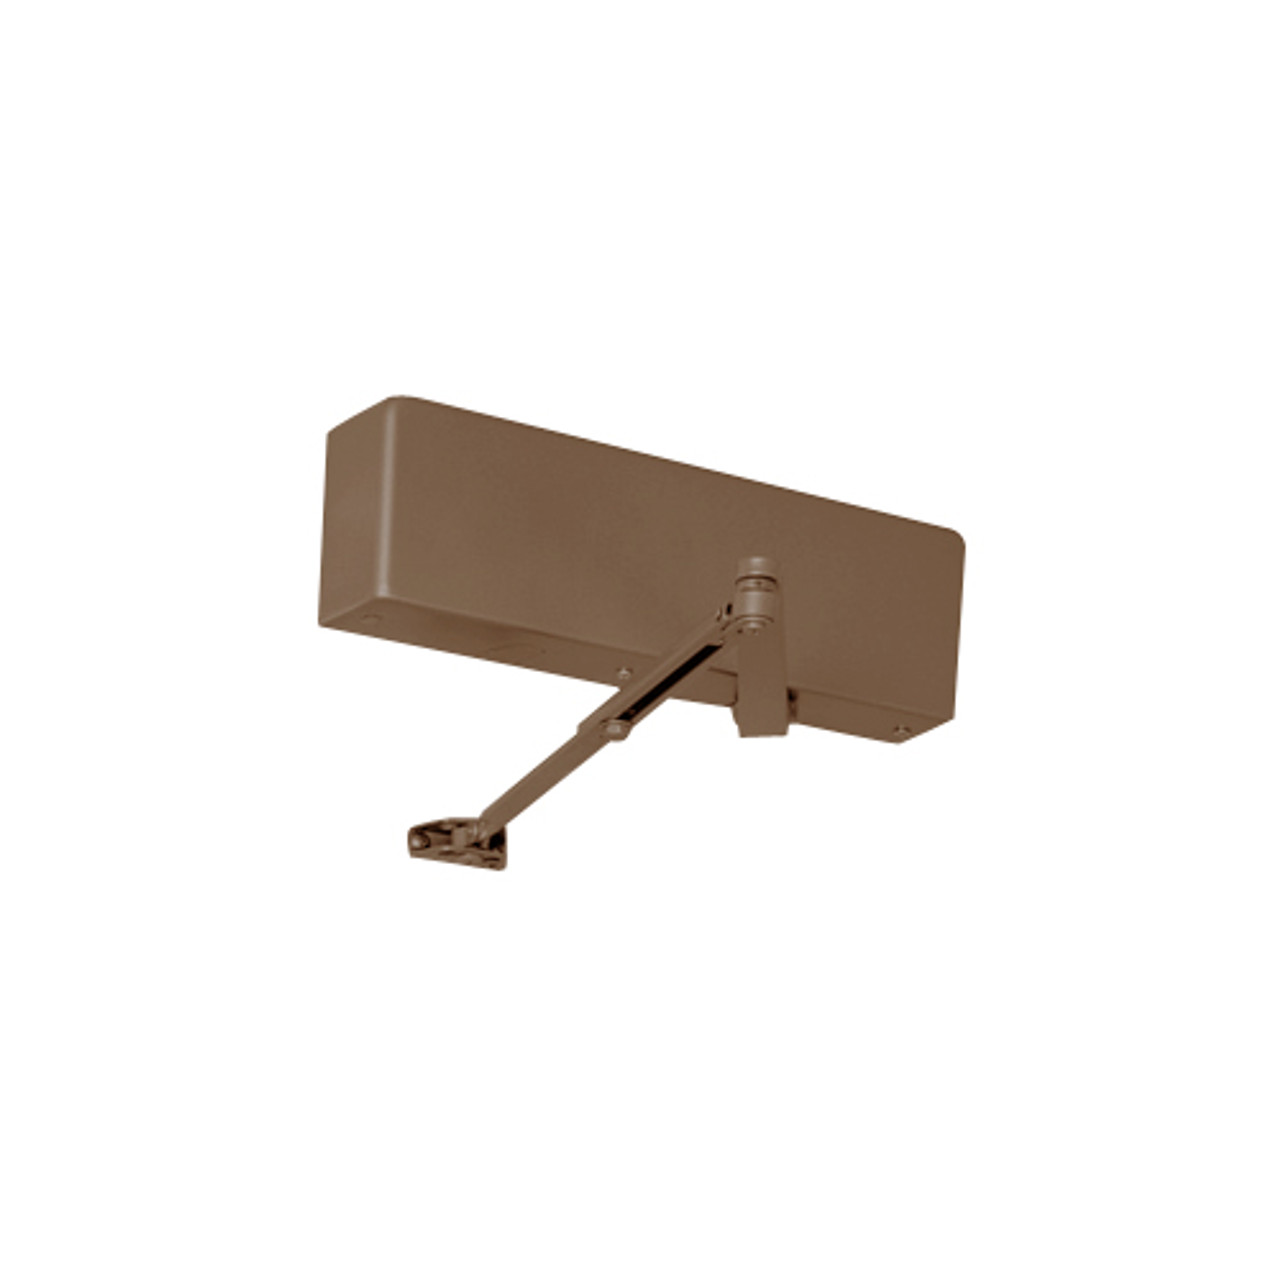 J7500HM-691 Norton 7500 Series Hold Open Institutional Door Closer with Top Jamb Only Reveals 2-3/4 to 6-3/4 inch to 150 Degree in Dull Bronze Finish